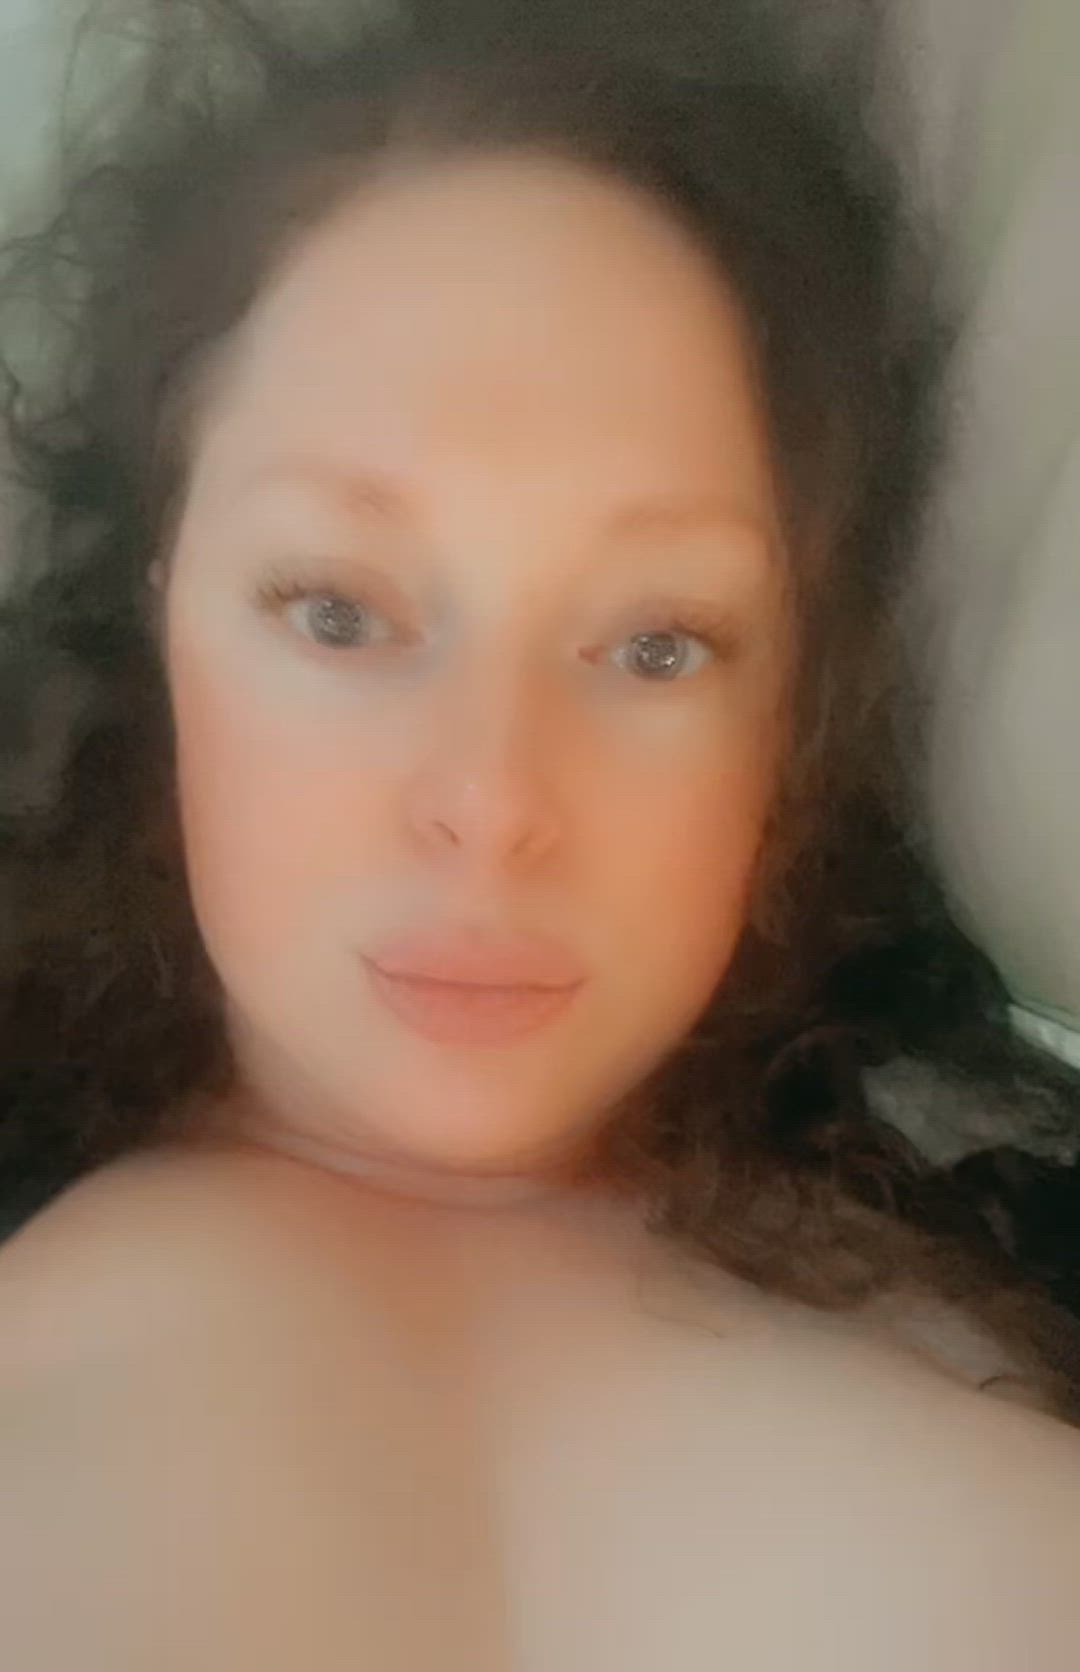 Big Tits porn video with onlyfans model veronicavocal <strong>@veronica.vocal</strong>